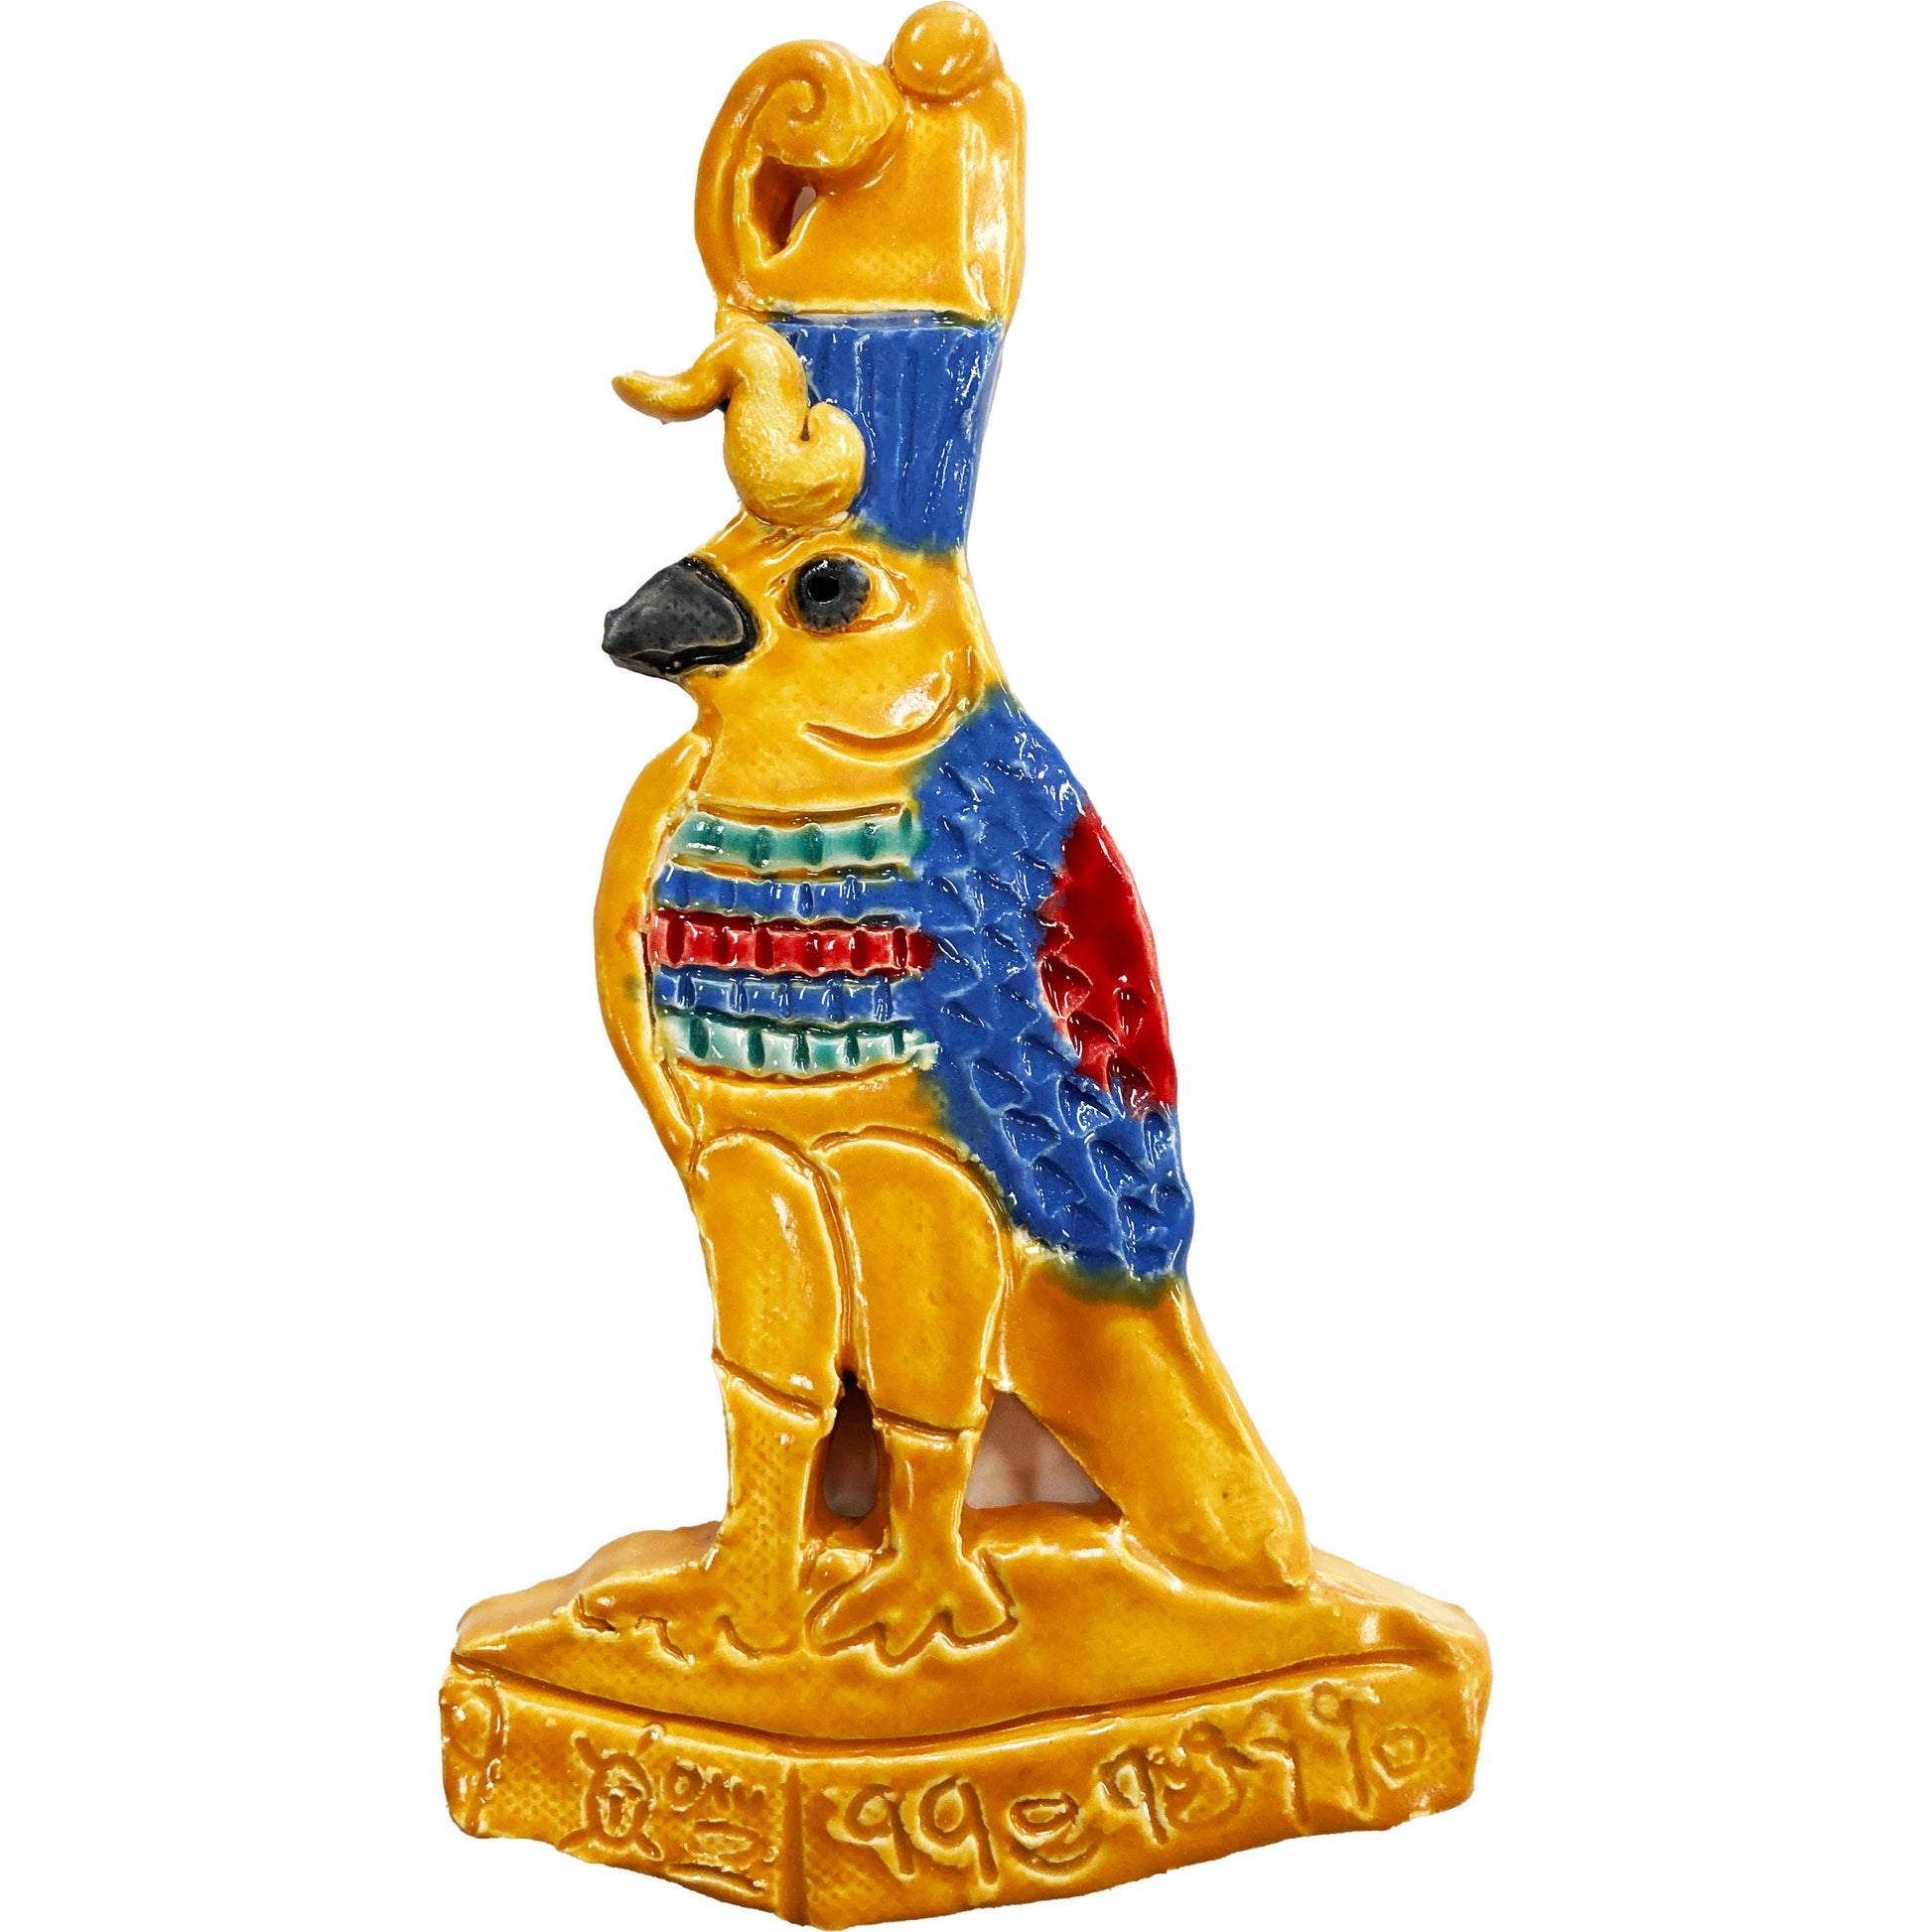 WATCH Resources Art Guild - Ceramic Arts Handmade Clay Crafts 7-inch x 4-inch Glazed Horus made by Lisa Uptain